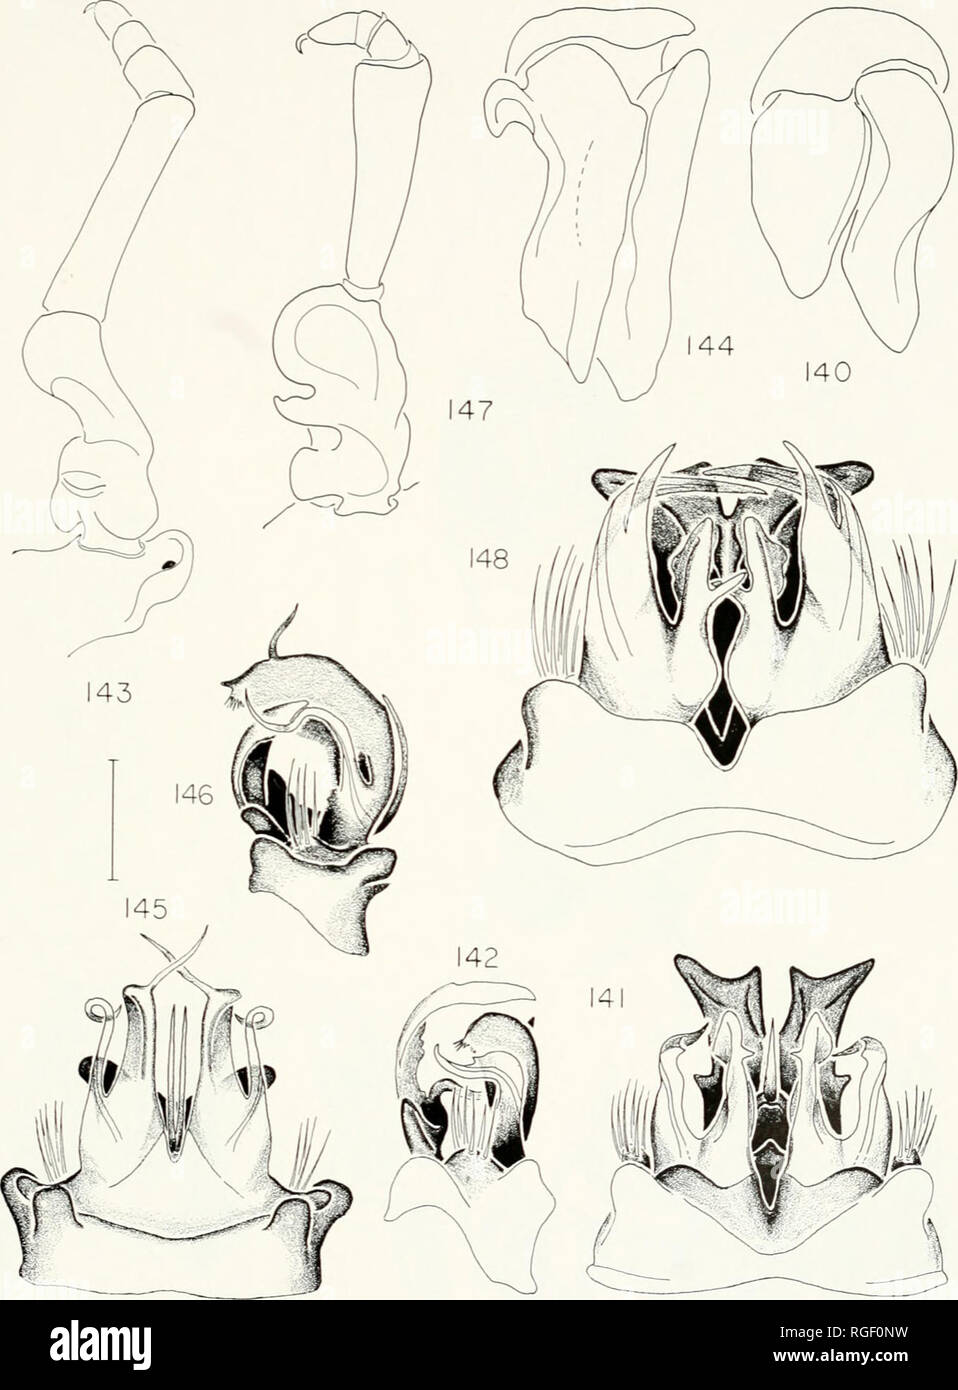 . Bulletin of the Museum of Comparative Zoology at Harvard College. Zoology. Studies in Chordeumida • Shear 299. Figures 140-148. Anatomy of Pseudotremia spp. Fig. 140. Right cyphopod of specimen of P. fulgida from same locality as those shown in Figs. 138 and 139, ventral view. Figs. 141-144. P. corterens/s. Fig. 141. Anterior gonopods, anterior view. Fig. 142. Left anterior gonopod, lateral view. Fig. 143. Right posterior gonopod, anterior view. Fig. 144. Right cyphopod, ventral view. Figs. 145—147. P. deprehendor. Fig. 145. Anterior gonopods, anterior view. Fig. 146. Left anterior gonopod,  Stock Photo